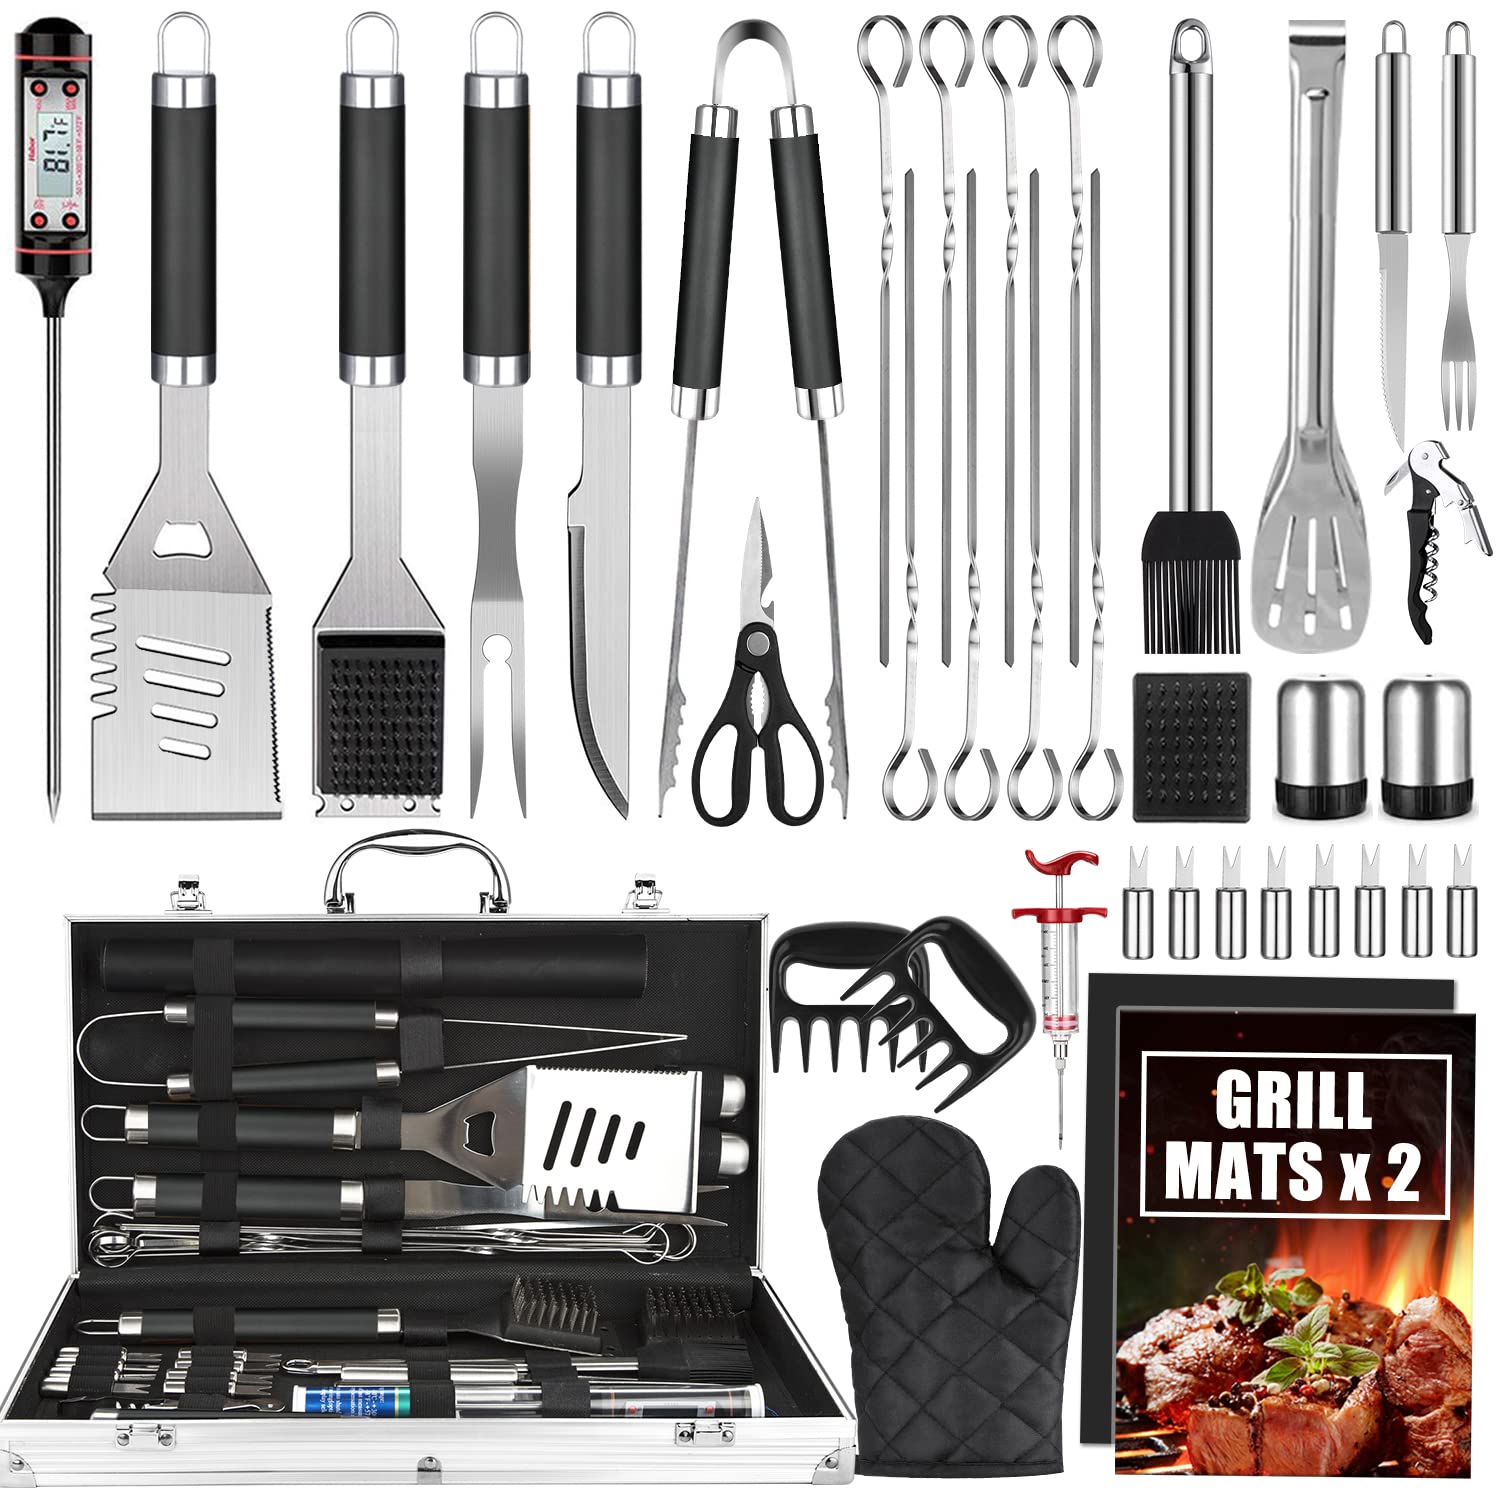 BBQ Grill Accessories Set, 38Pcs Stainless Steel Grill Tools Grilling Accessories with Aluminum Case, Thermometer, Grill Mats for Camping/Backyard Barbecue, Grill Utensils Set for Men Women - image 1 of 7